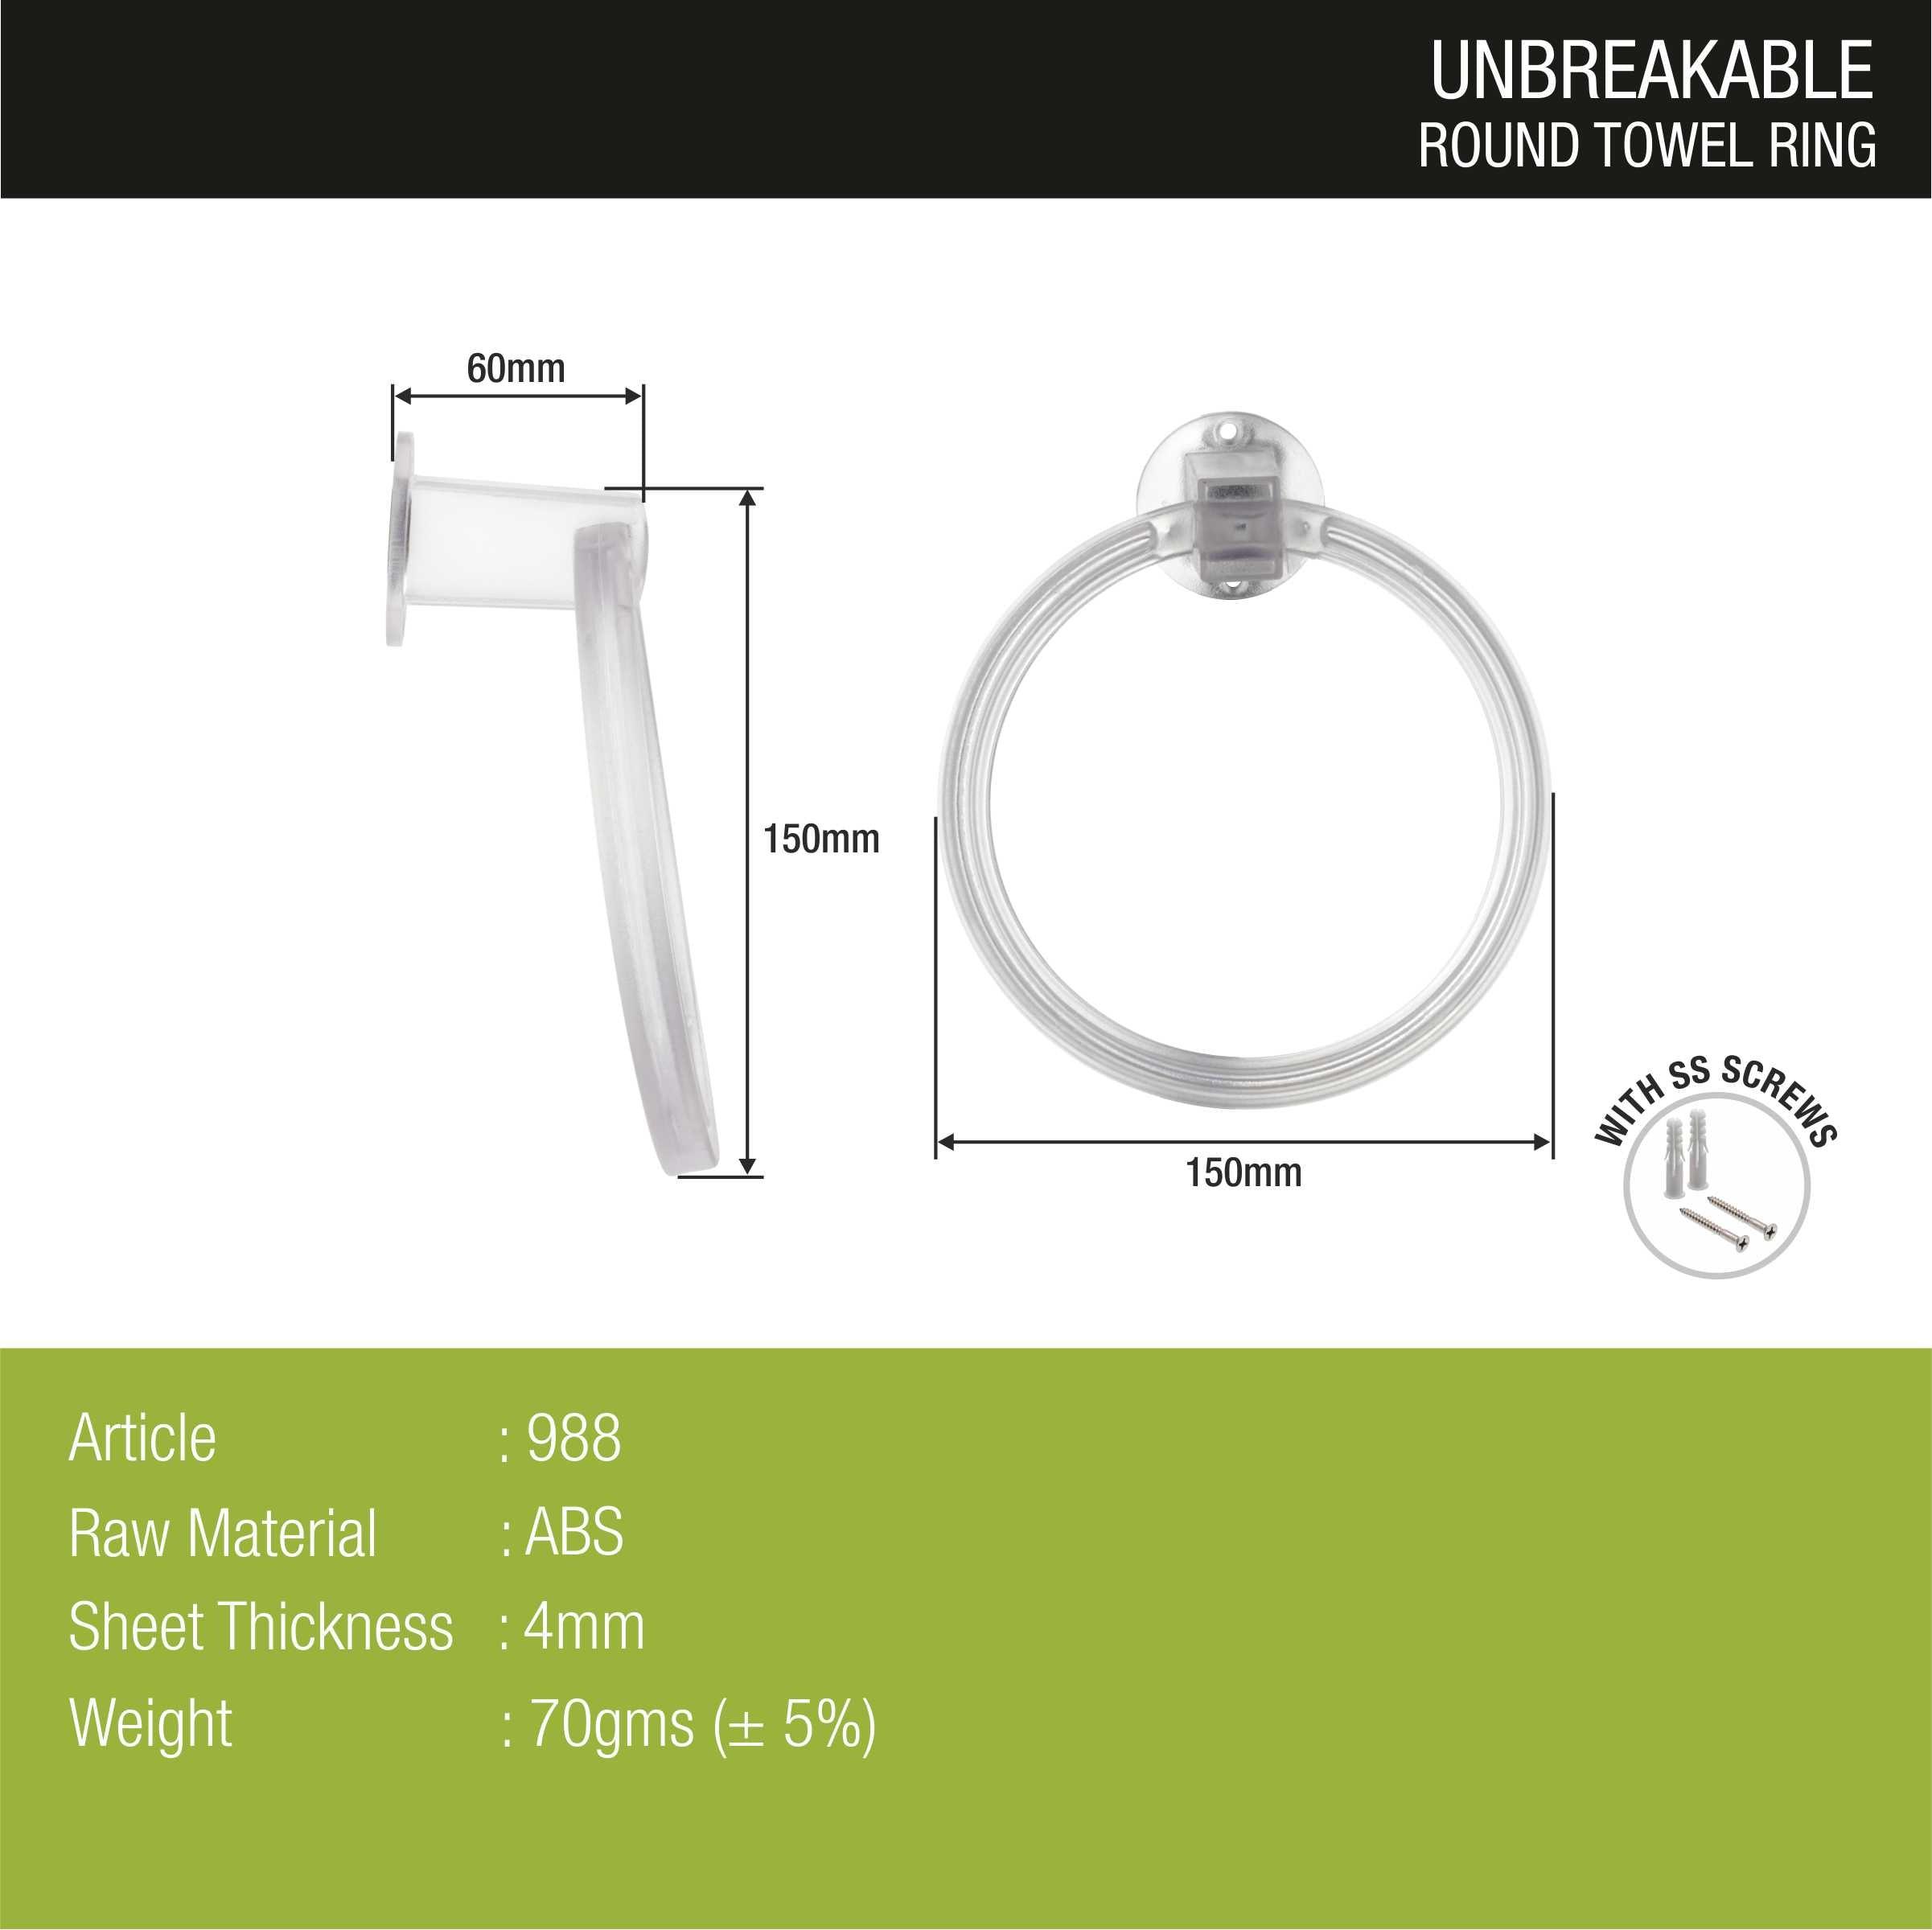 ABS Round Towel Ring dimensions and sizes